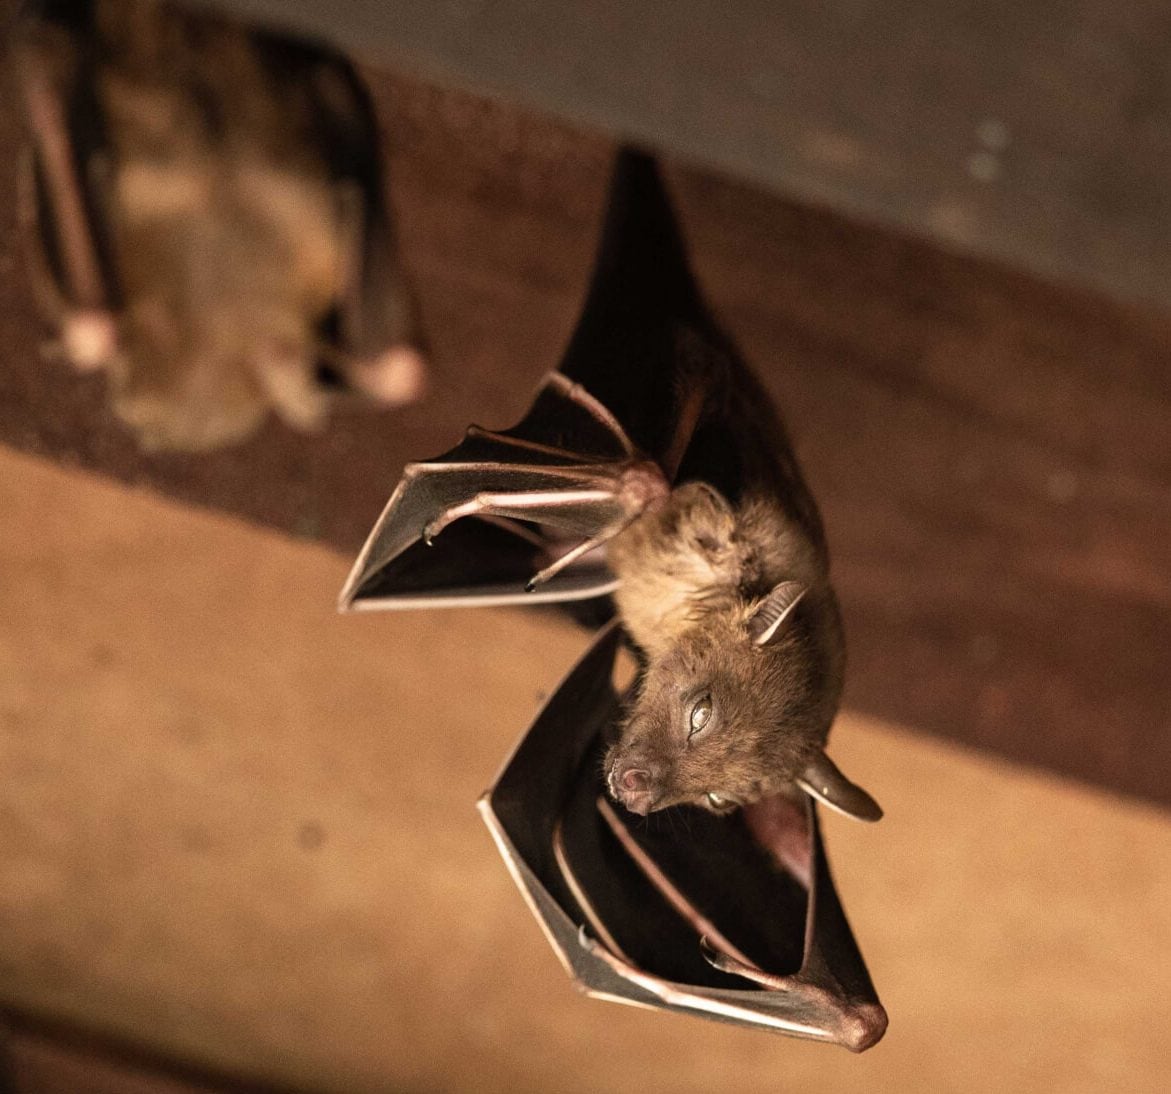 bat removal services from wildlife removal experts in Sun City West